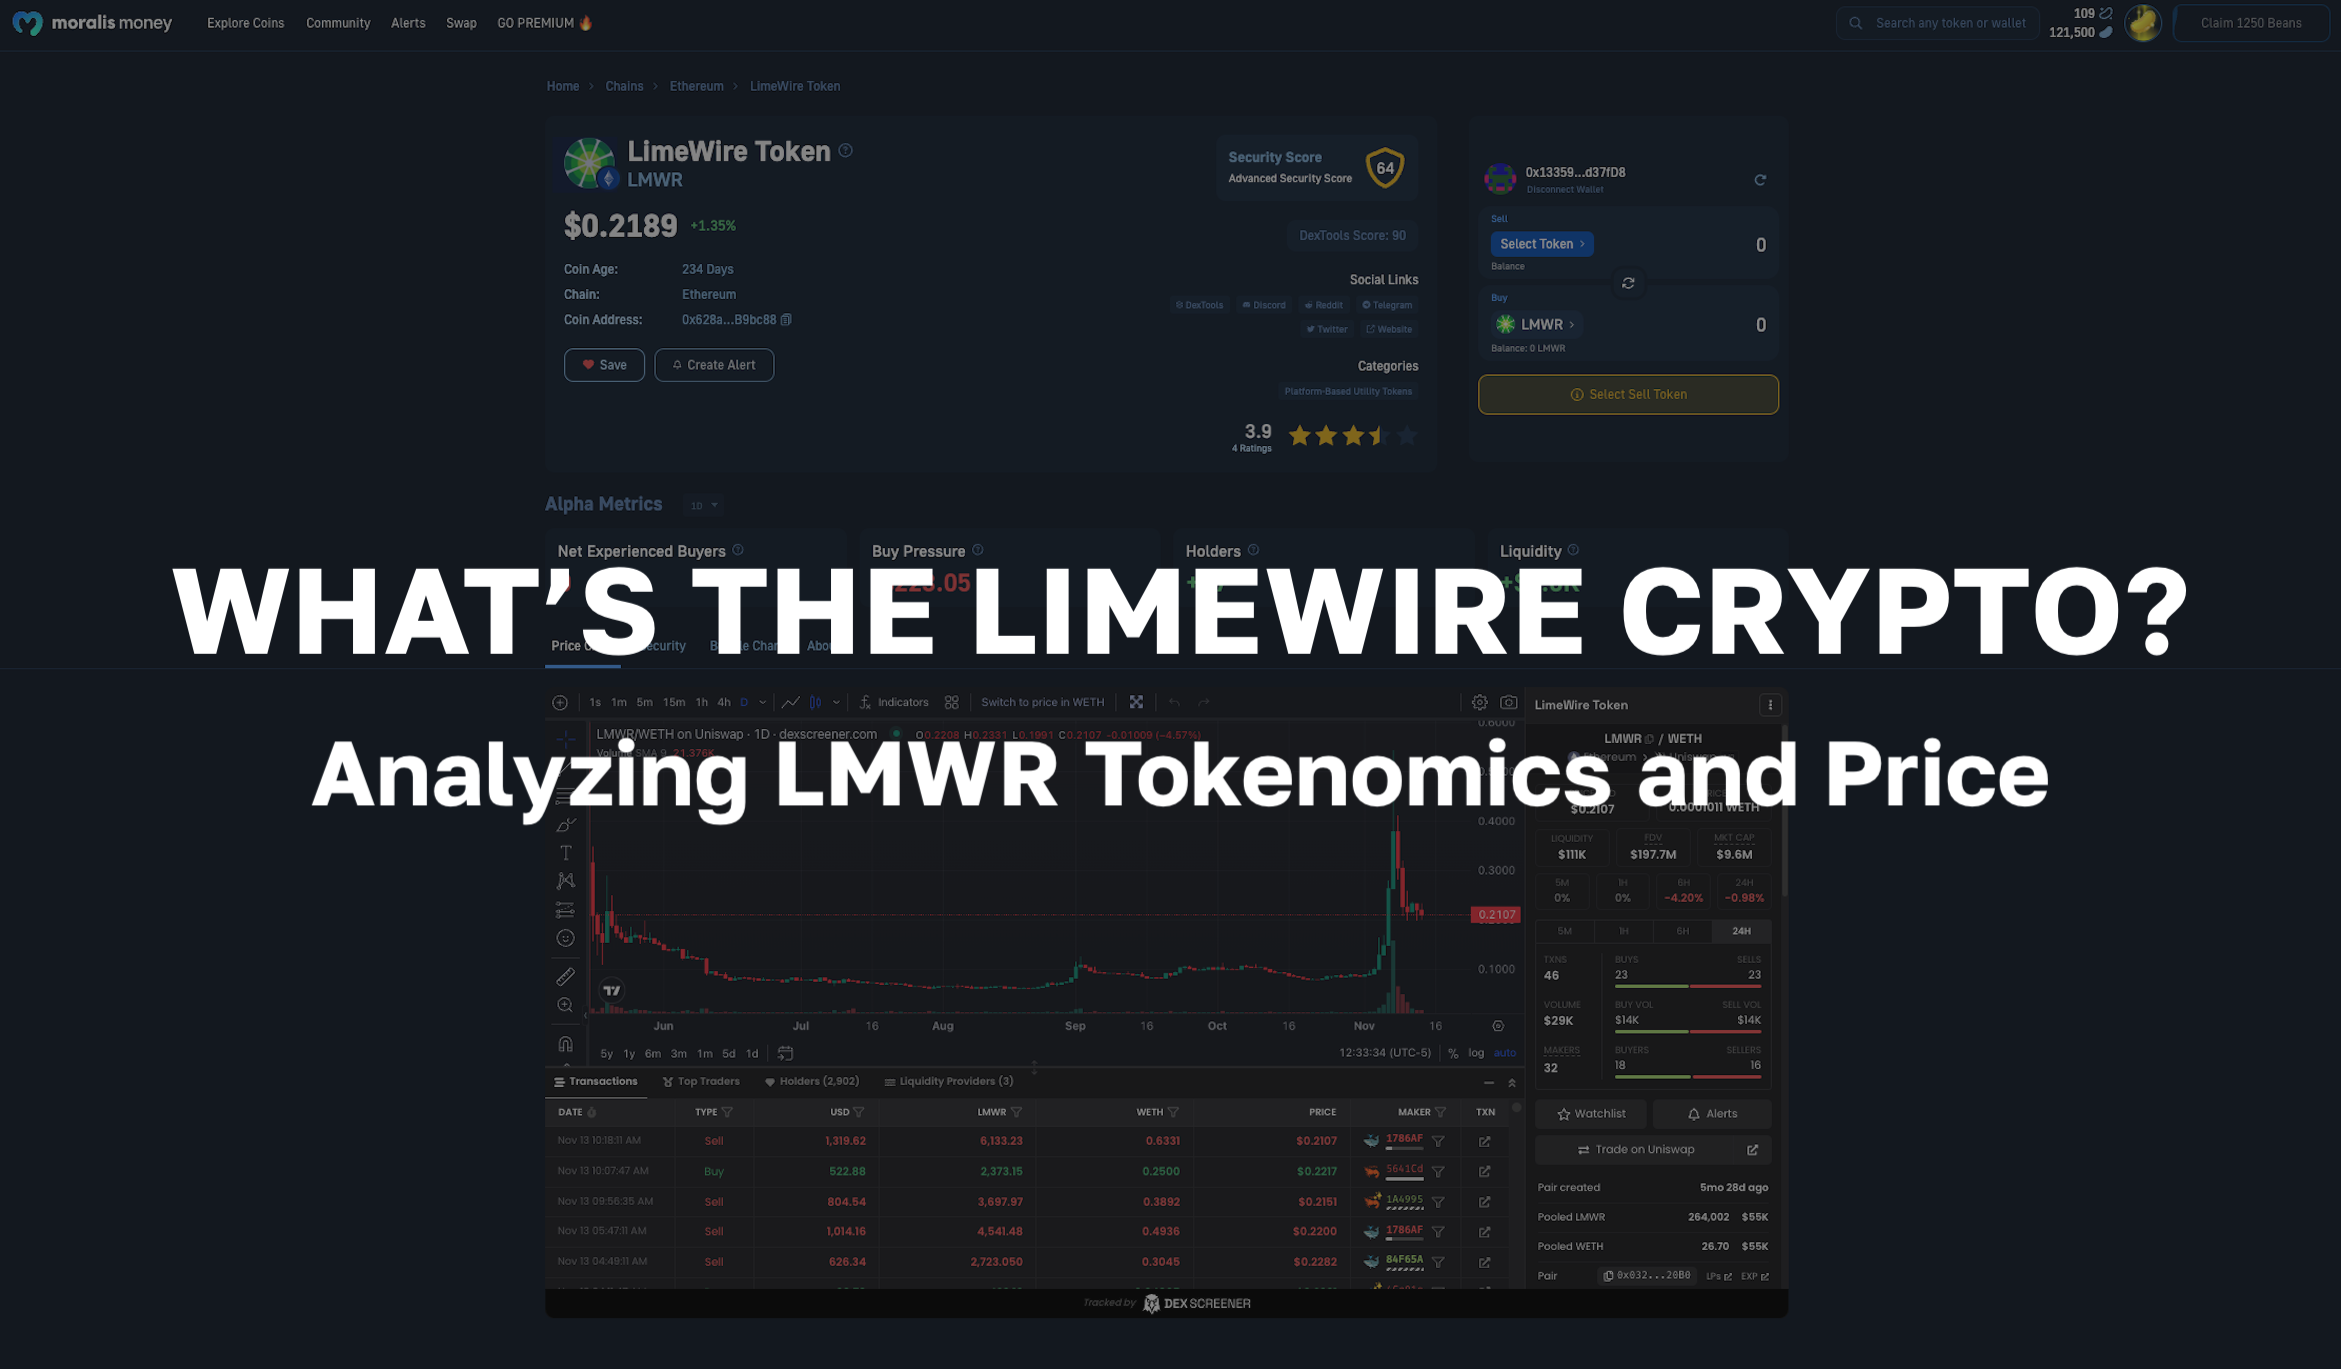 What is the LimeWire Crypto? Analyzing LMWR Tokenomics and Price